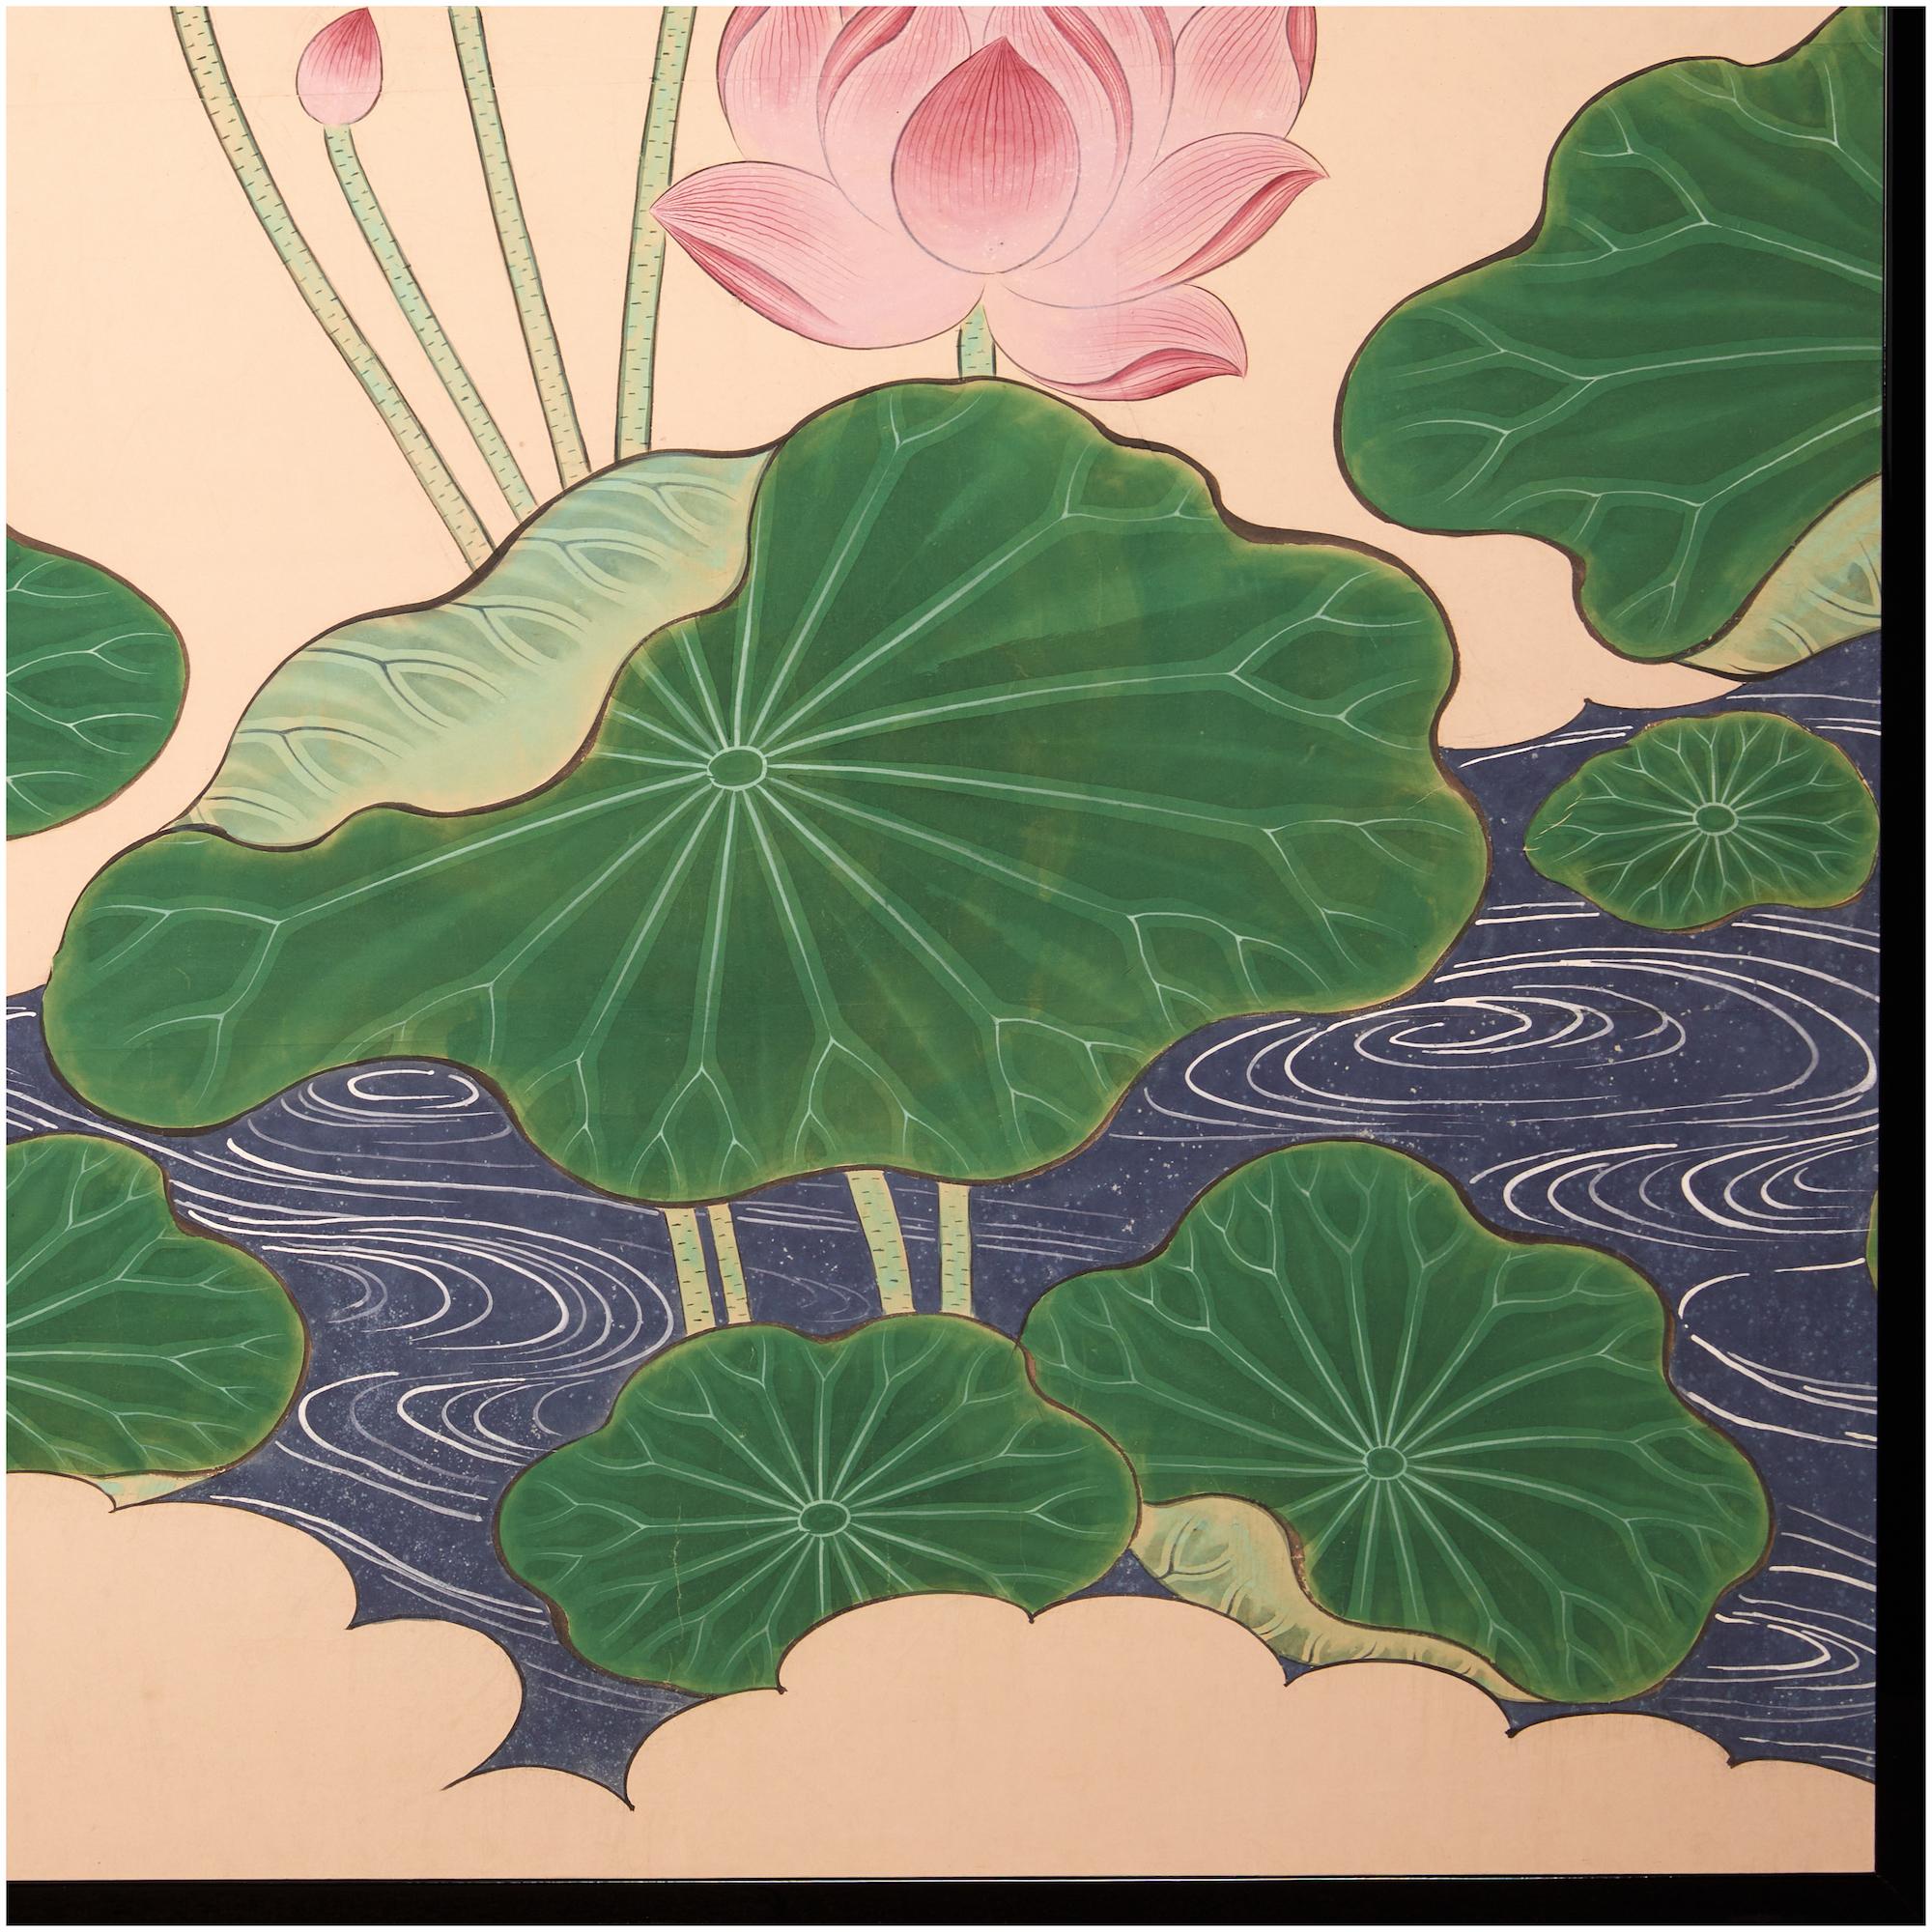 A lotus scene with flowers in bloom floating on the water's surface. As the lotus rise from below for an enlightening process that brings an abundance of purity and beauty. Mineral pigments on mulberry paper with black lacquer wooden trim.